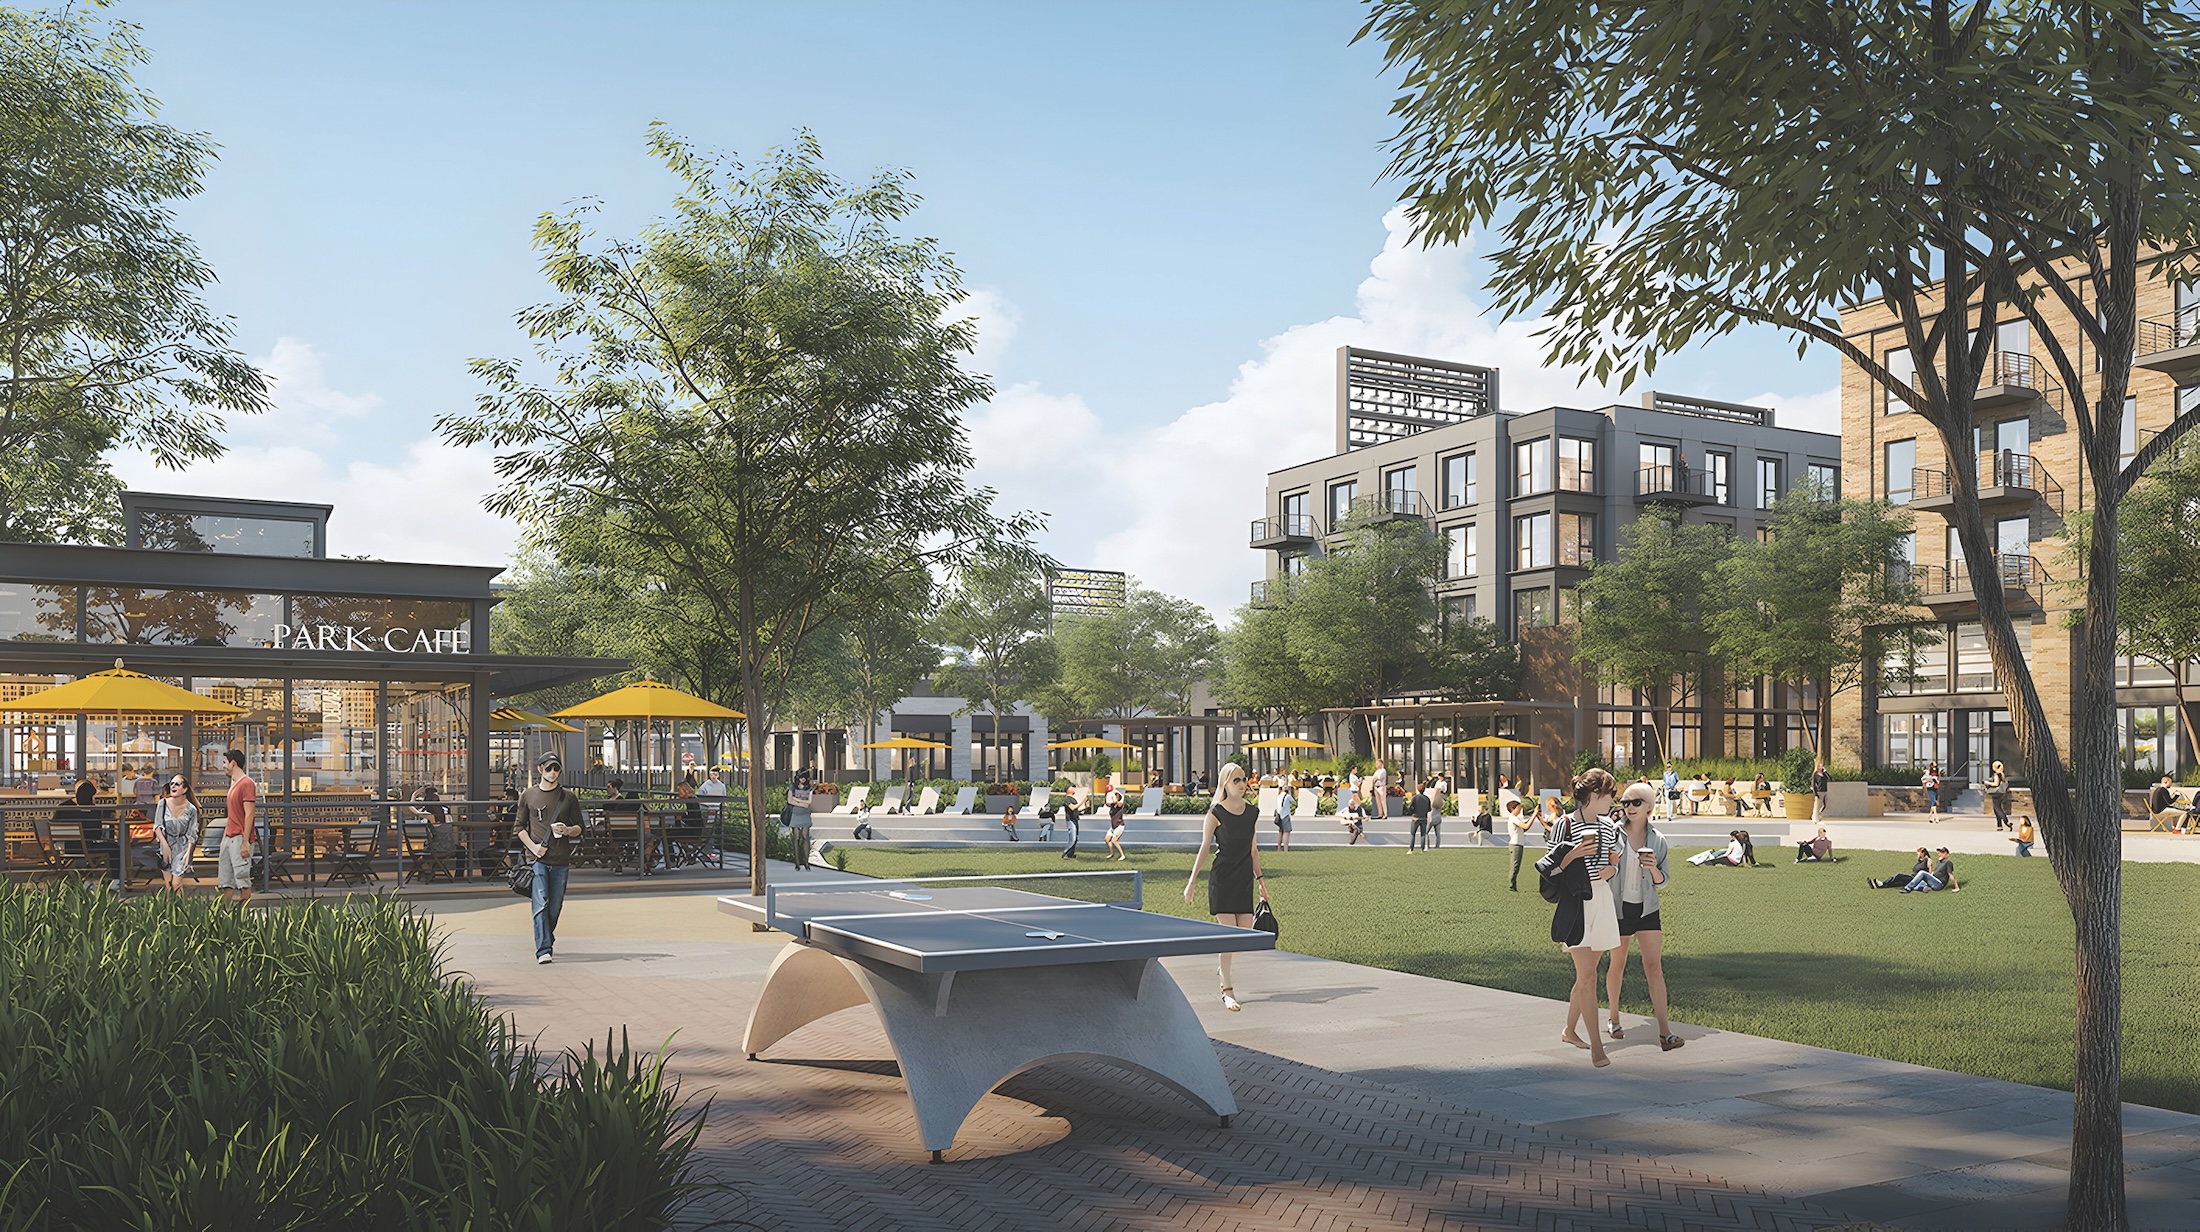 Downtown Daybreak’s first phase will include spaces for retail, food and beverage, offices, apartments, and outdoor parks and recreation. Rendering: MVE + Partners